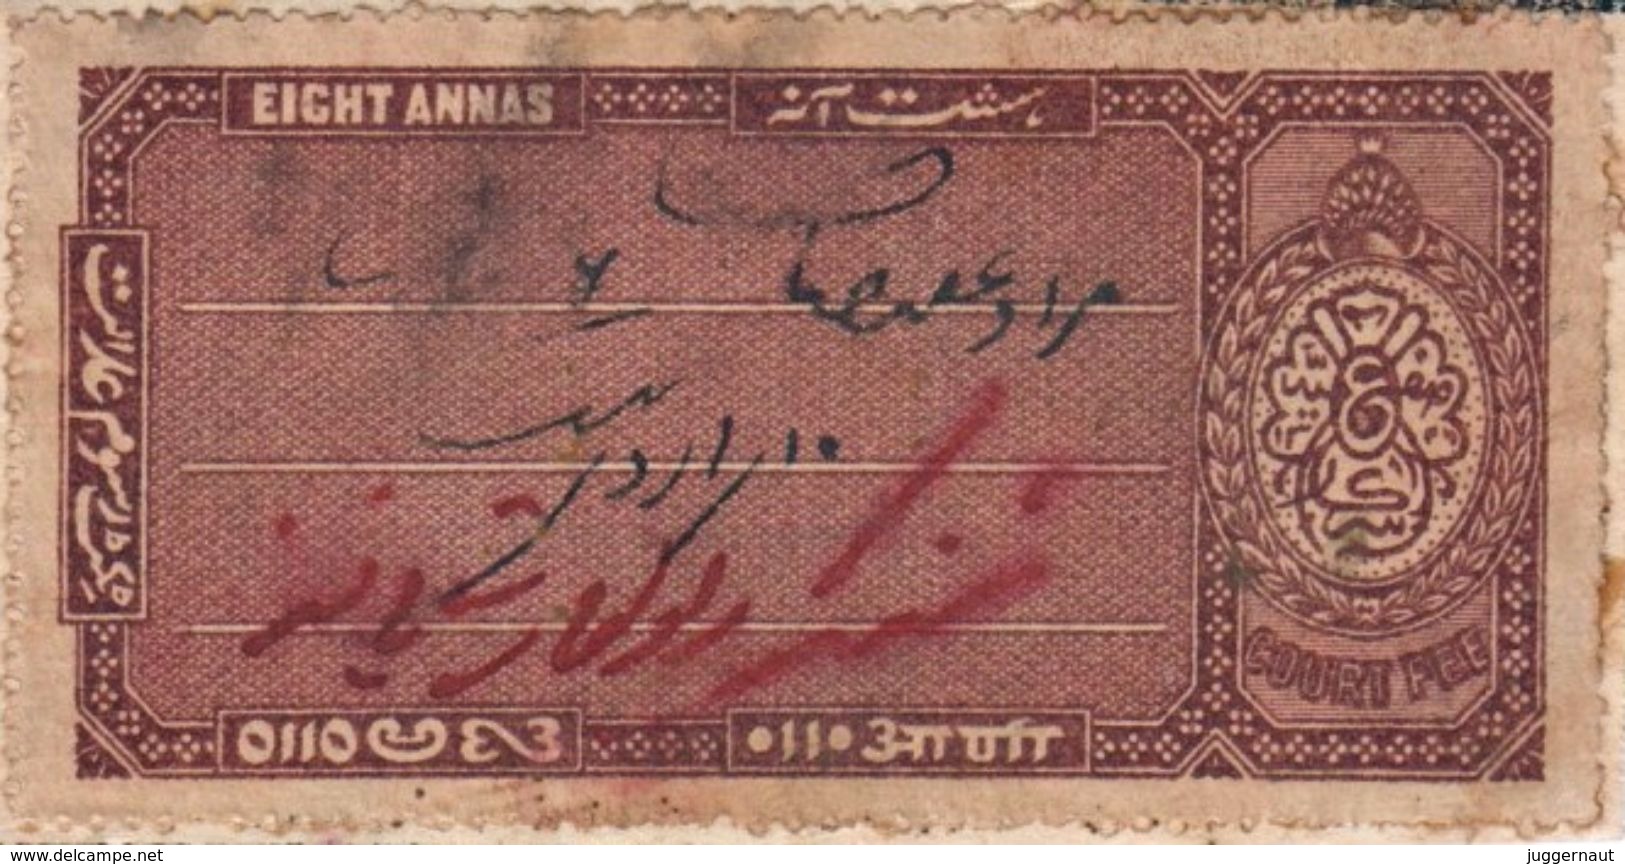 INDIA HYDERABAD PRINCELY STATE 8-ANNAS COURT FEE STAMP 1908 GOOD/USED - Hyderabad